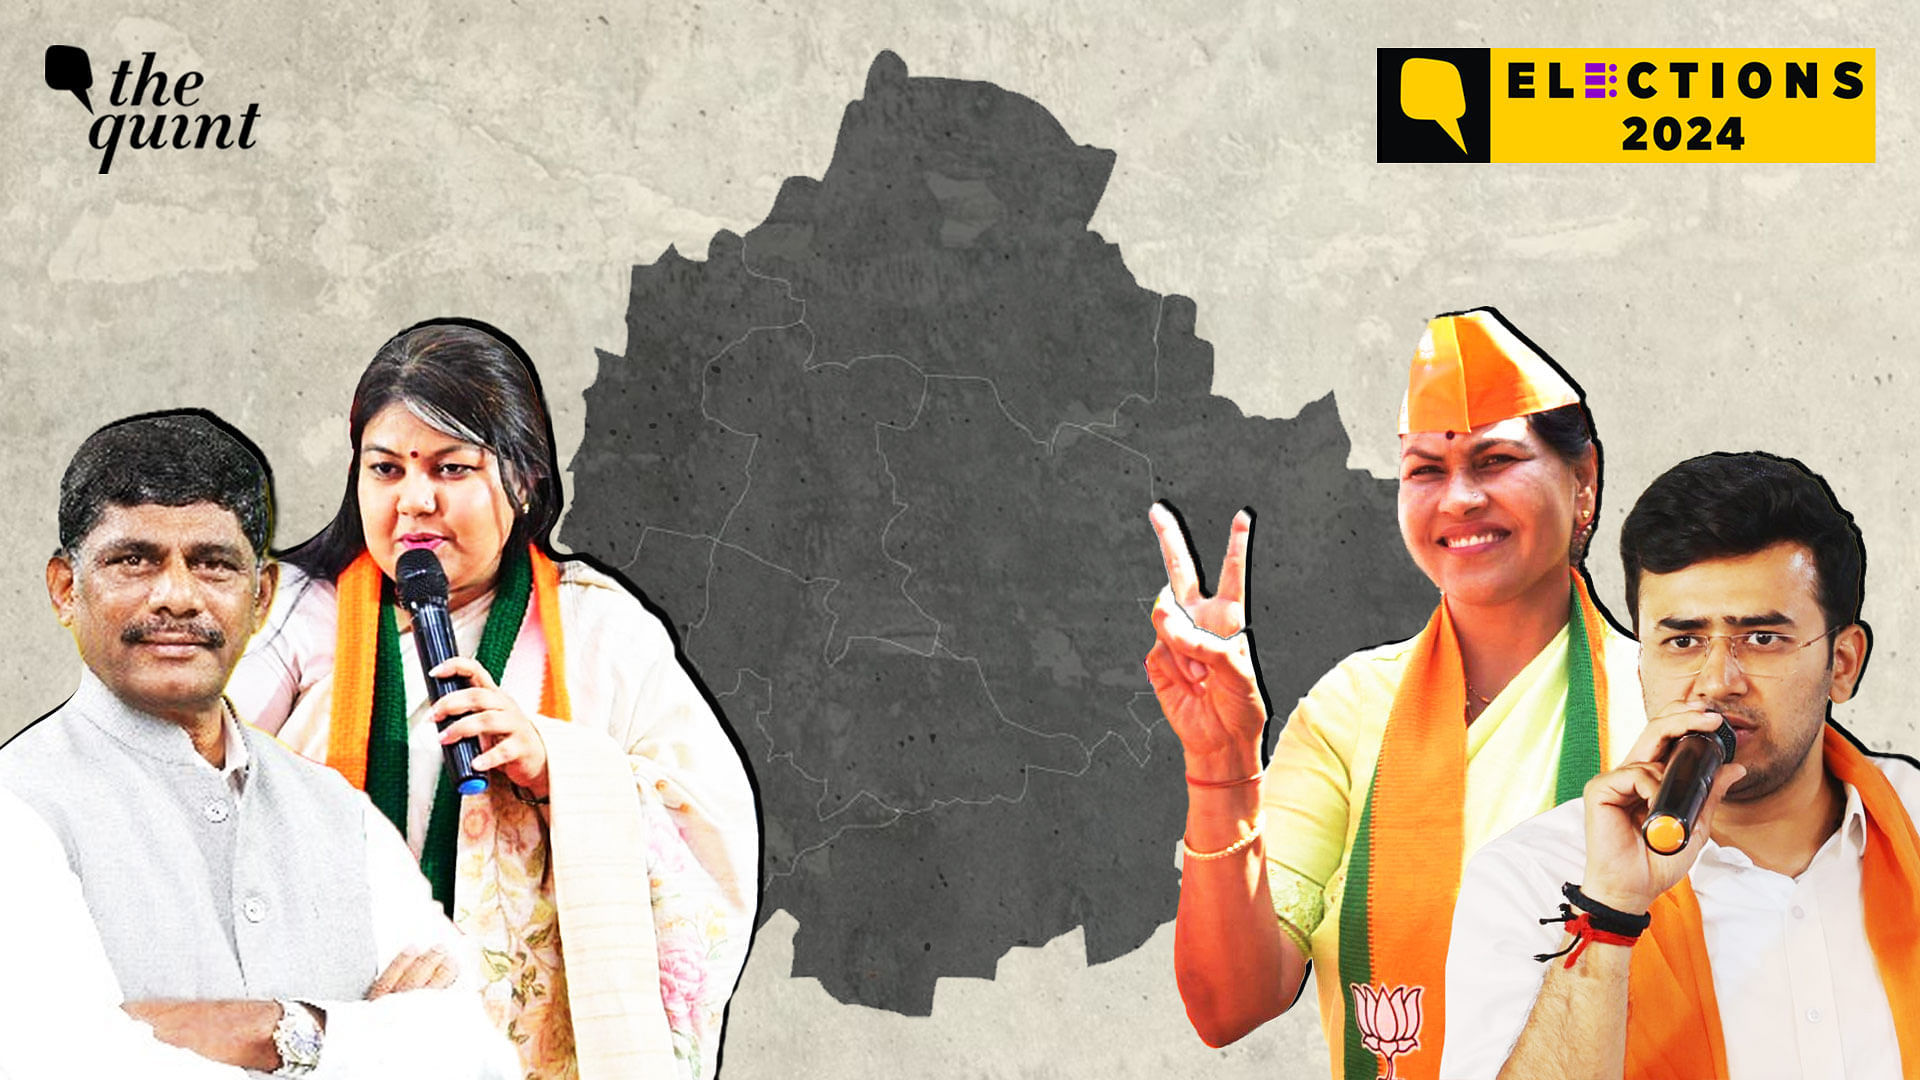 <div class="paragraphs"><p>As Karnataka holds a significant importance in the BJP’s electoral strategy within South India, the battle is one between<strong> </strong>the 'Modi factor' and BJP's 'development' narrative vs the Congress'&nbsp;<a href="https://www.thequint.com/news/politics/karnataka-cm-siddaramaiah-free-electricity-households-congress">five guarantee scheme</a>.</p></div>